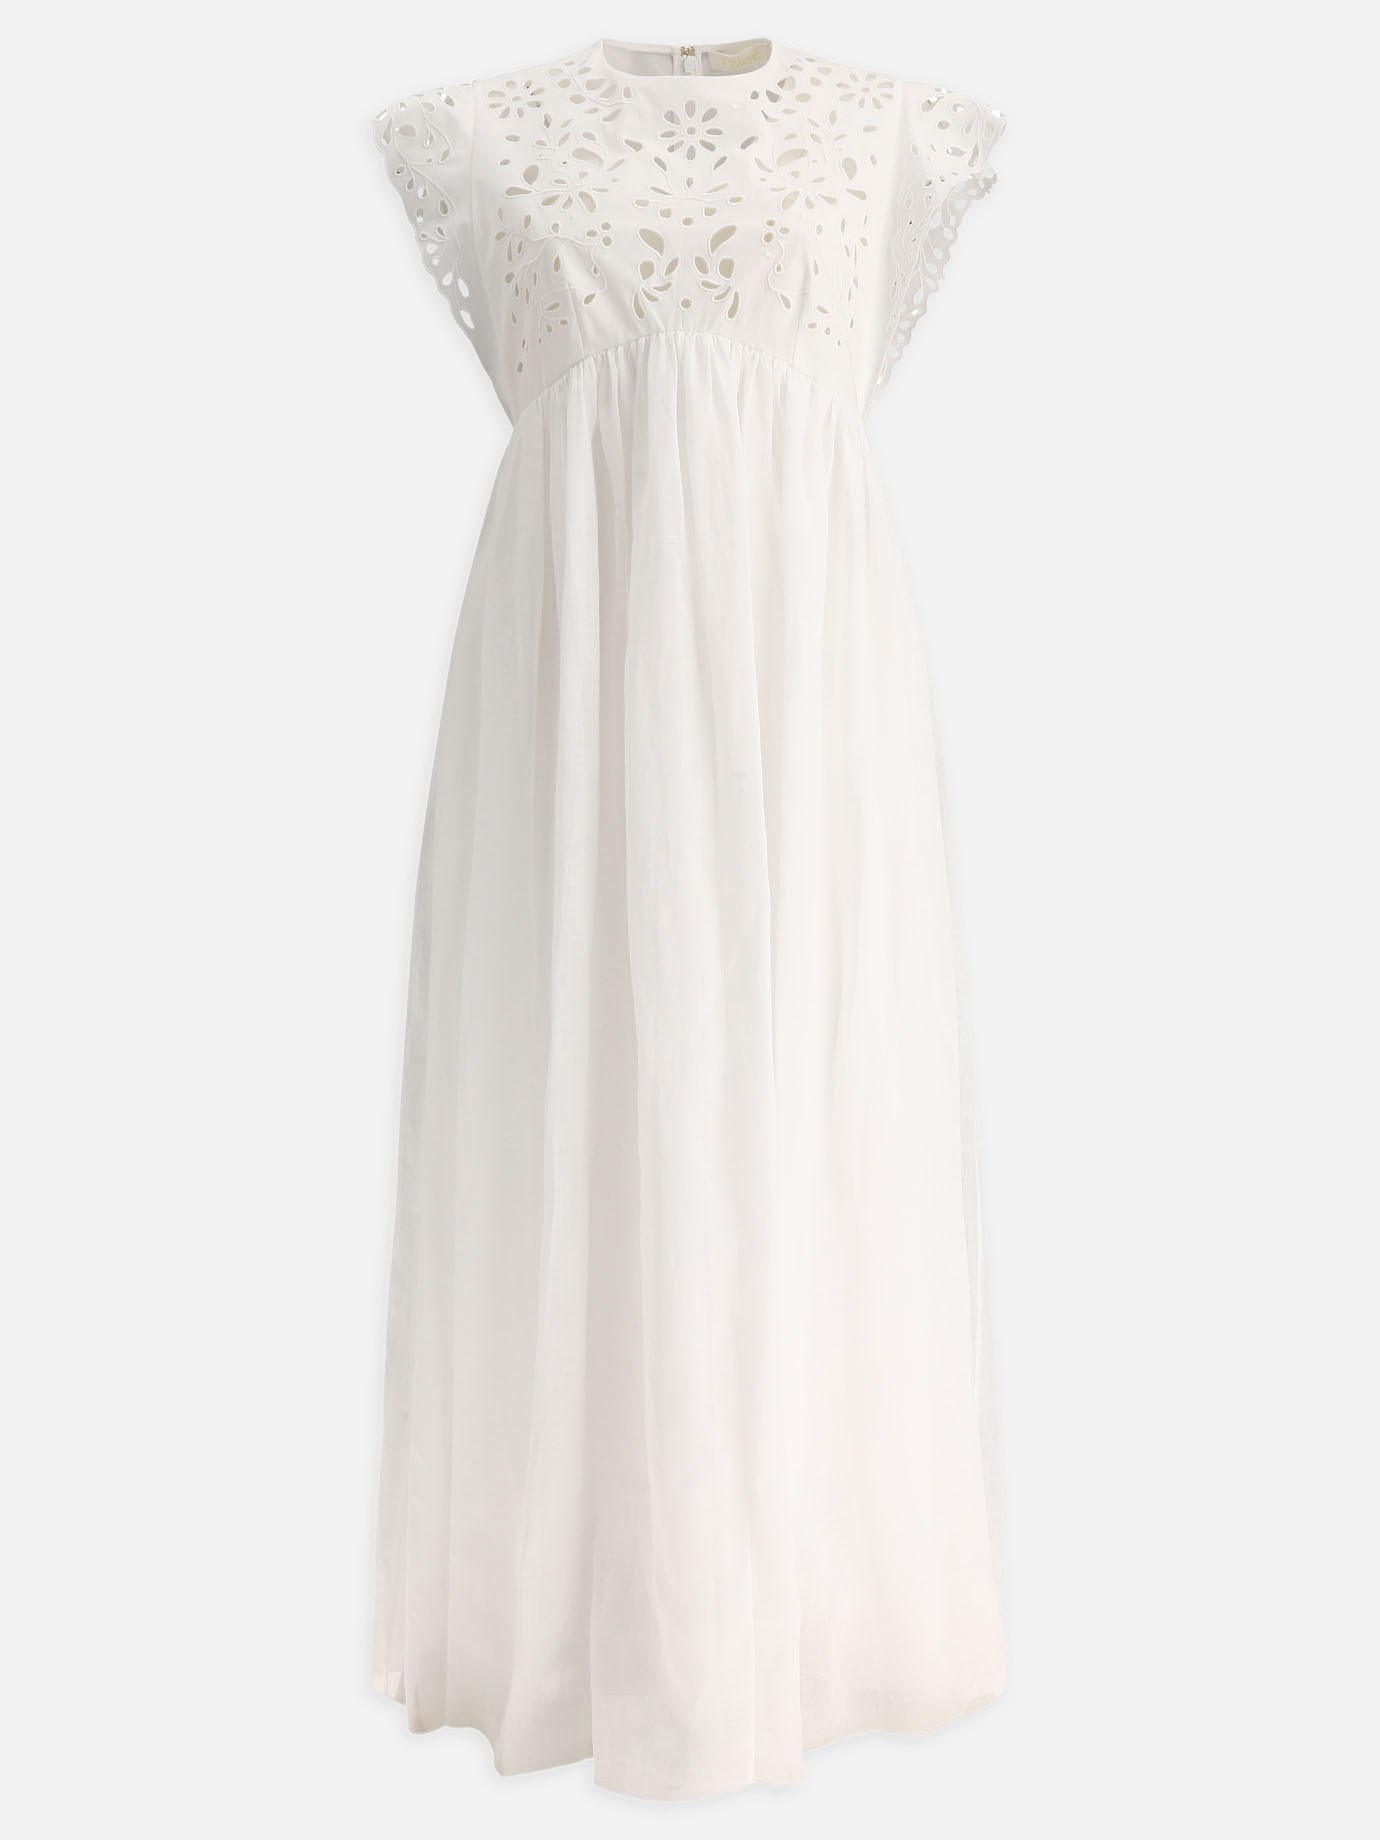 Dress with lace details by Chloé